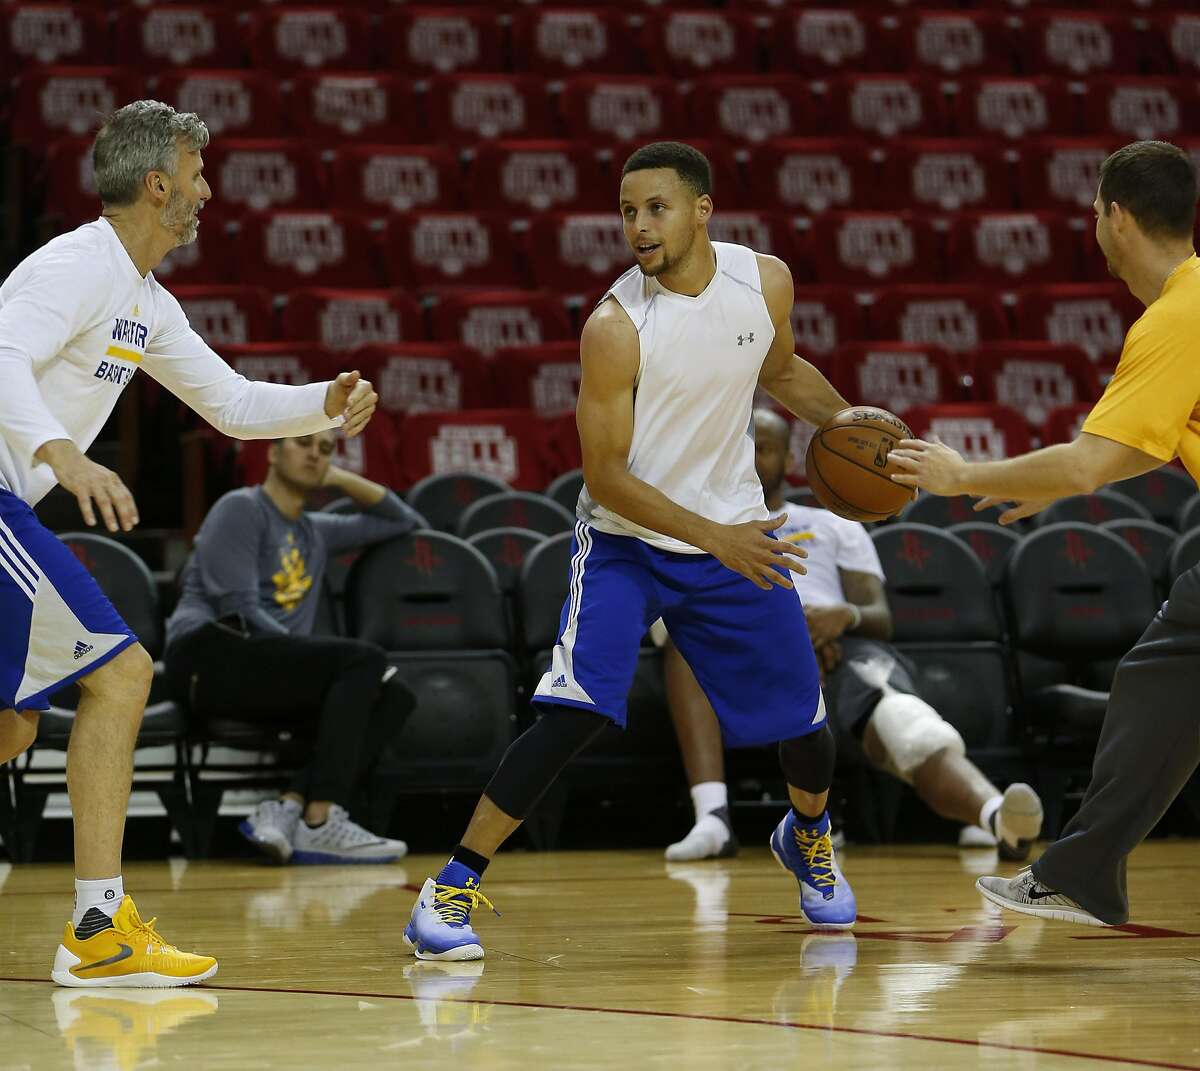 Golden State Warriors point guard Stephen Curry is double teamed by trainers as they practiced at Toyota Center, Wednesday, April 20, 2016, in Houston, as they prepared for Game 3 against the Houston Rockets in Round 1 of the playoffs. ( Karen Warren / Houston Chronicle )